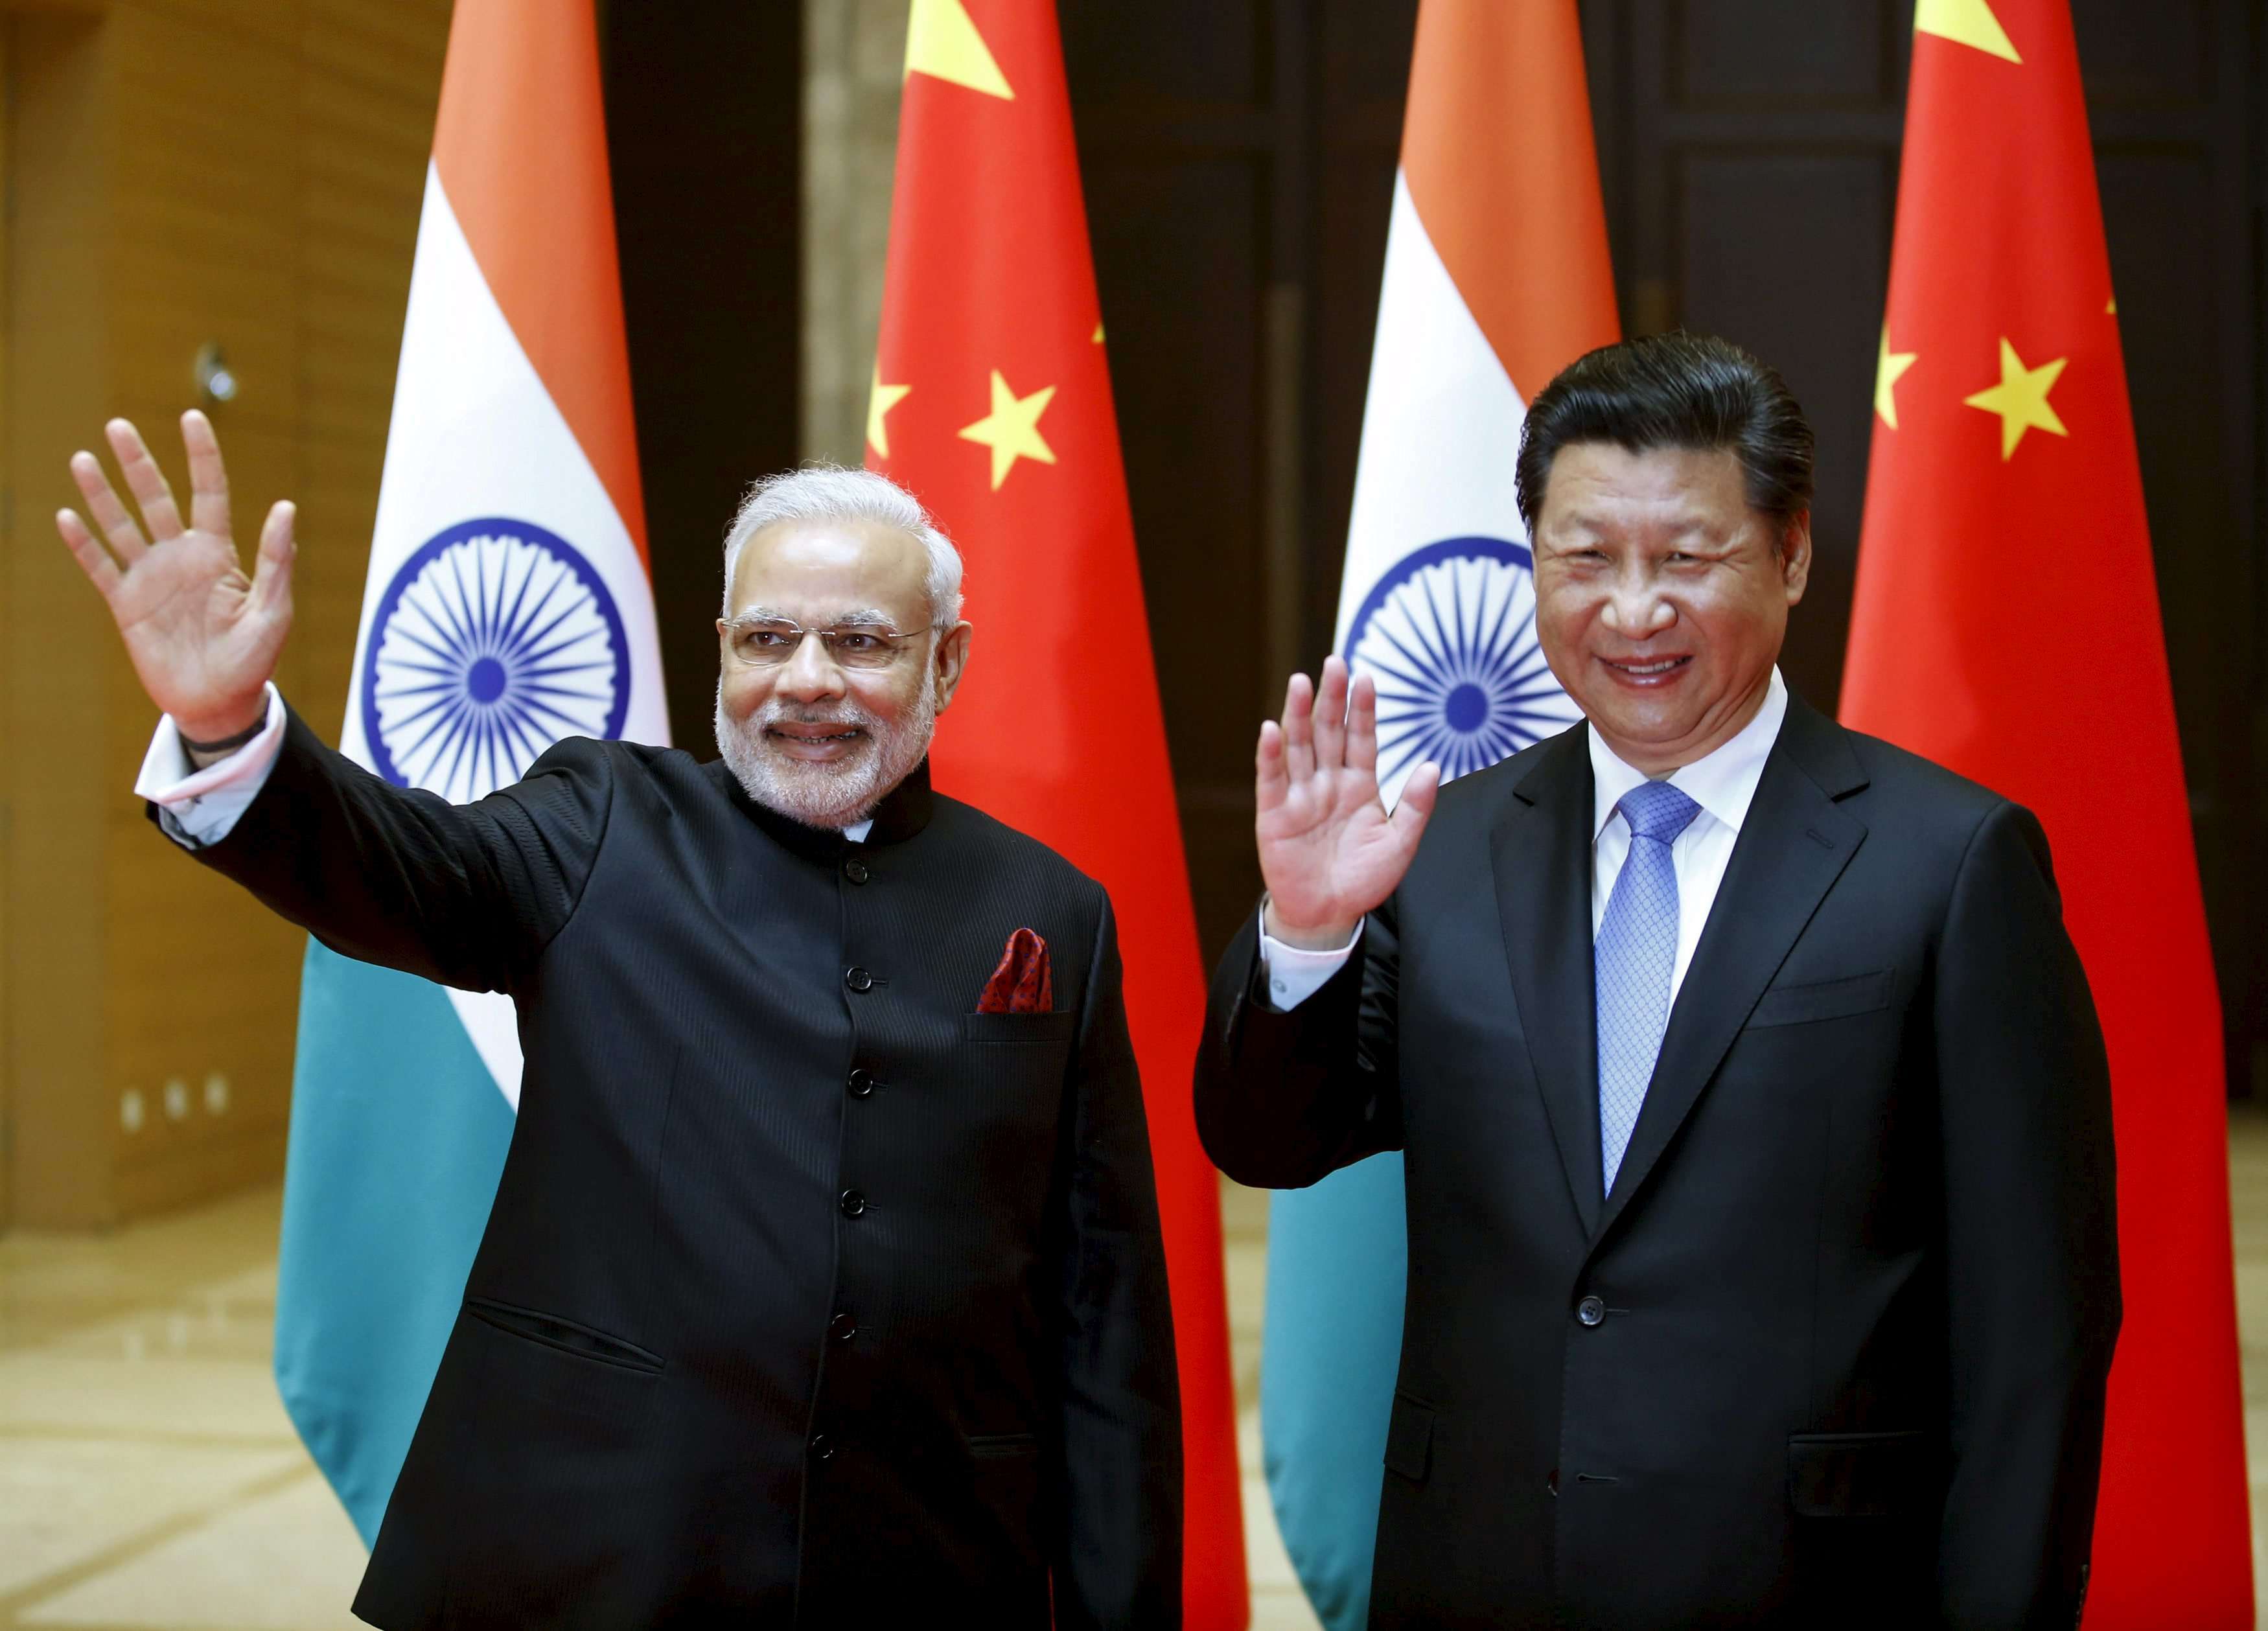 Indian Prime Minister Narendra Modi and President Xi Jinping wave before a meeting in Xian, Shaanxi province, in May 2015. Photo: Reuters